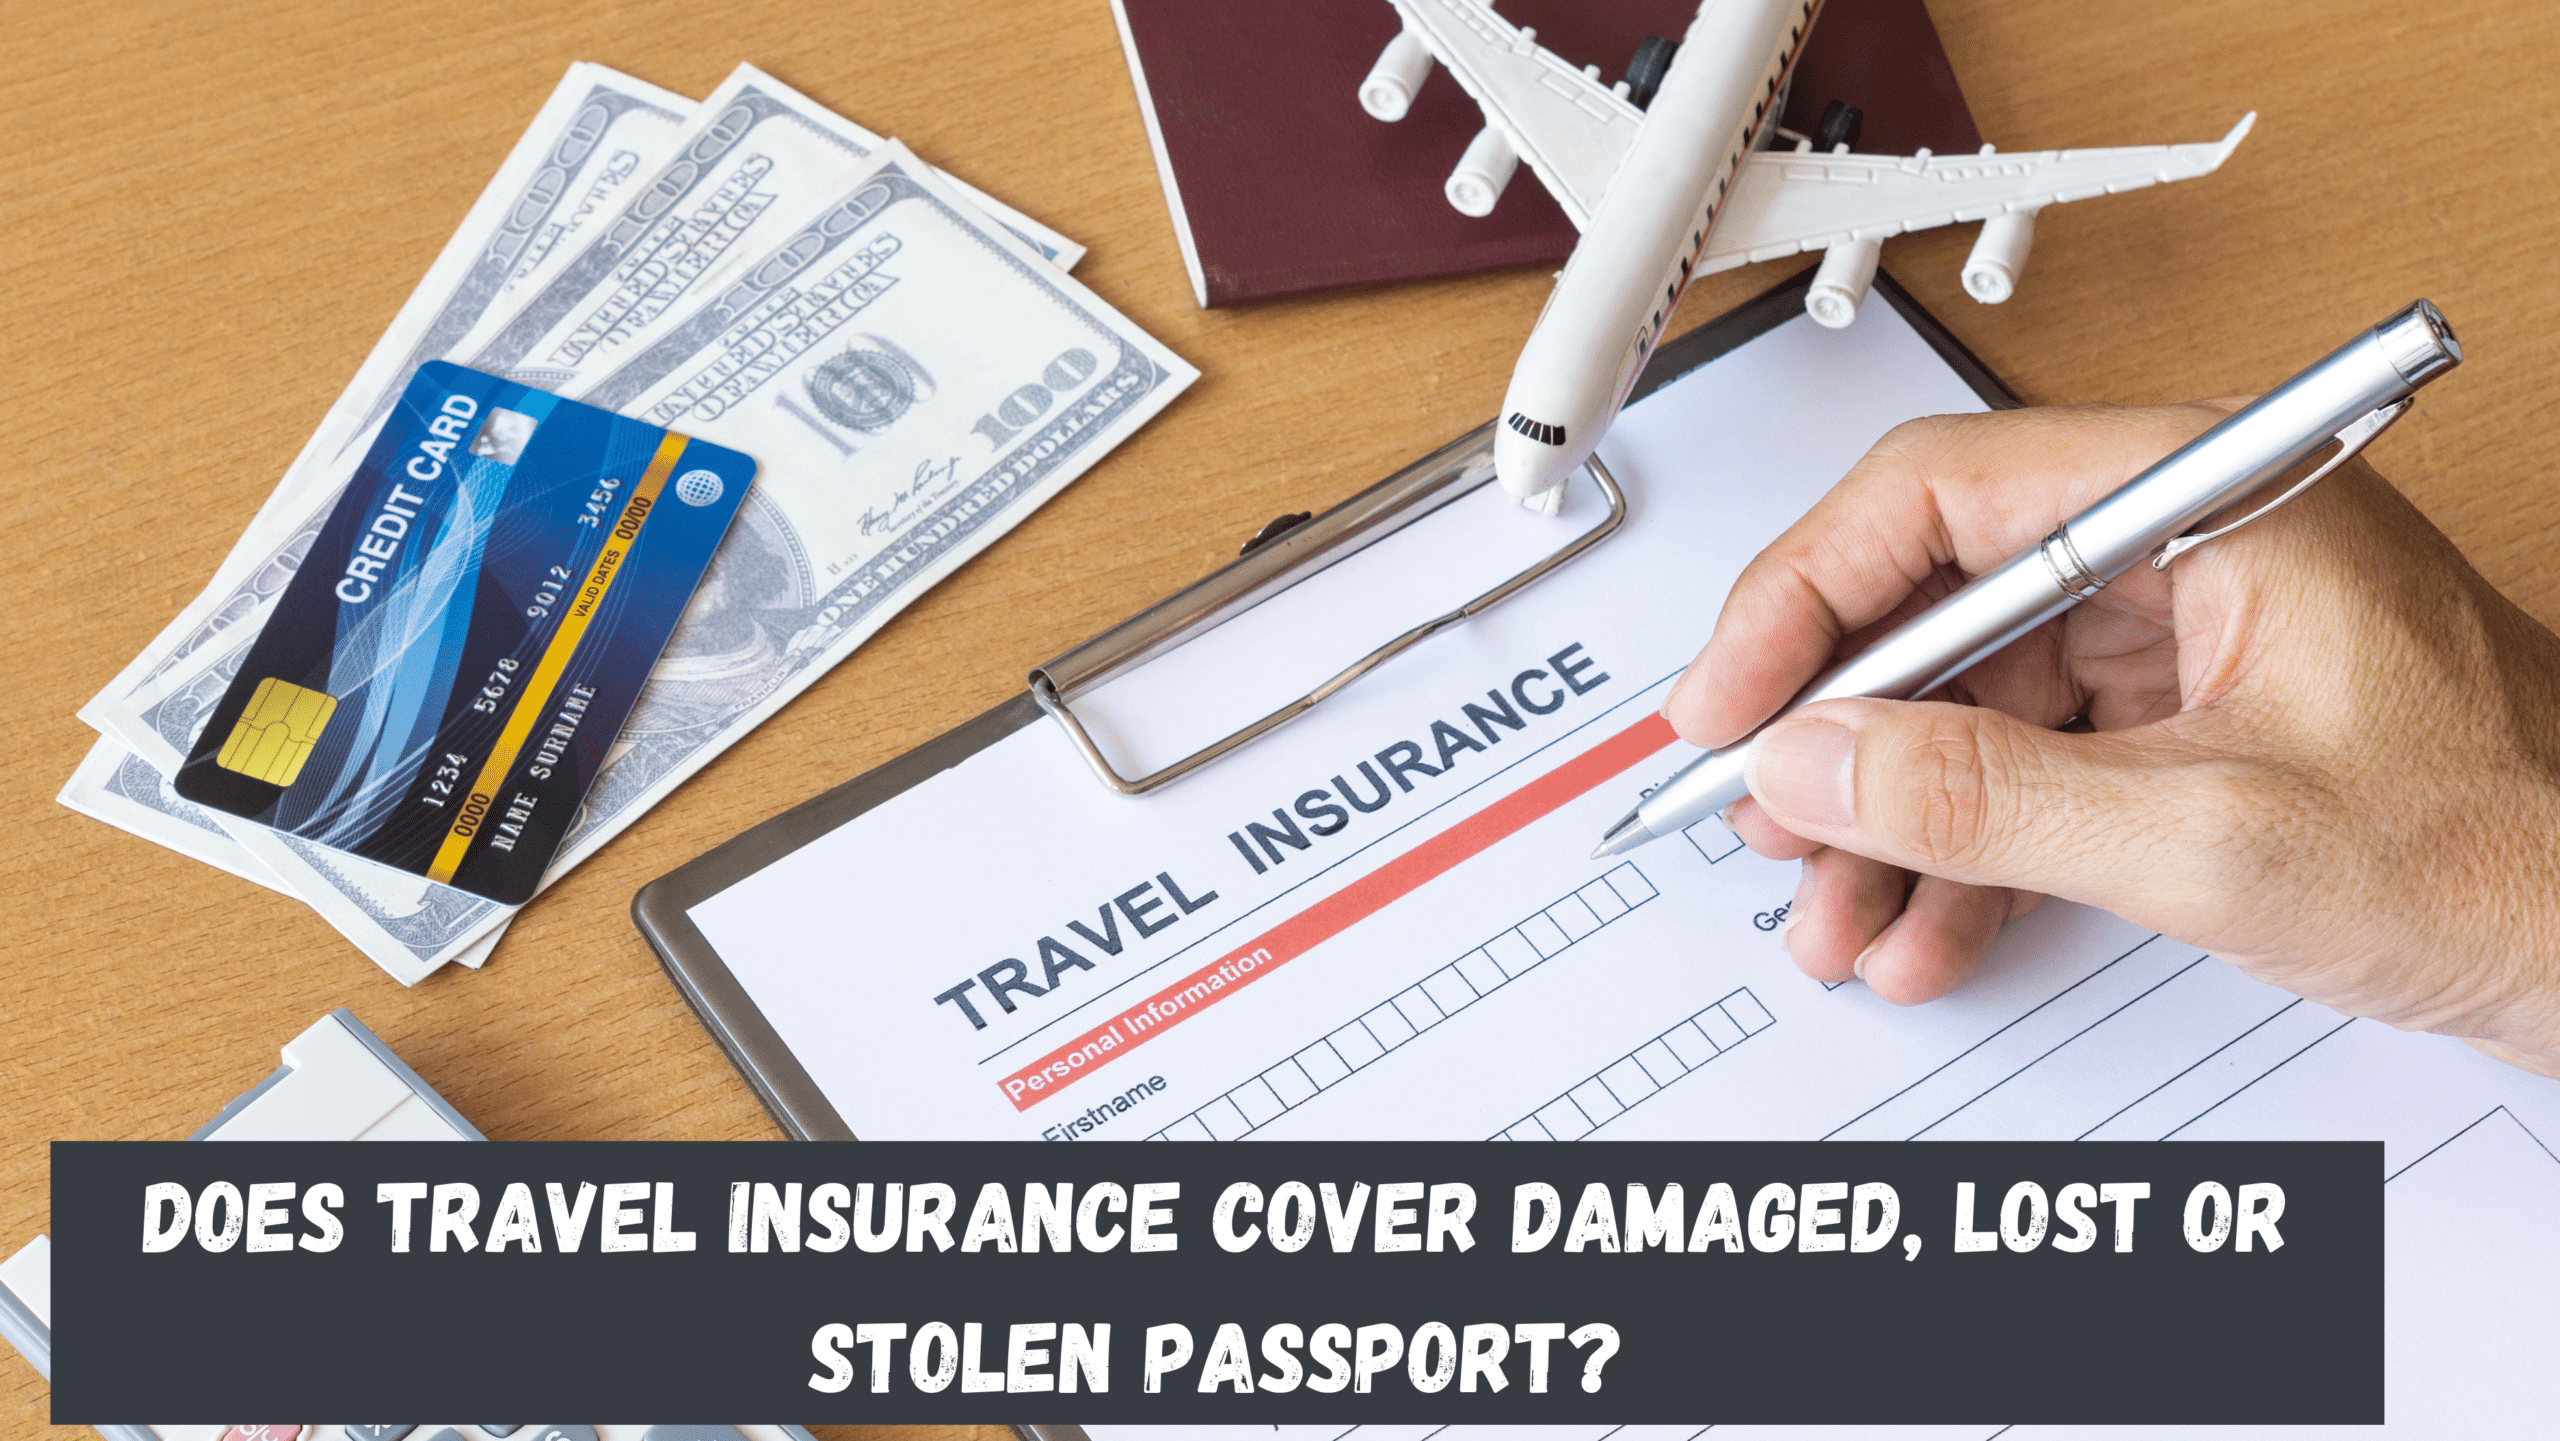 Does Travel Insurance Cover Damaged, Lost or Stolen Passport?